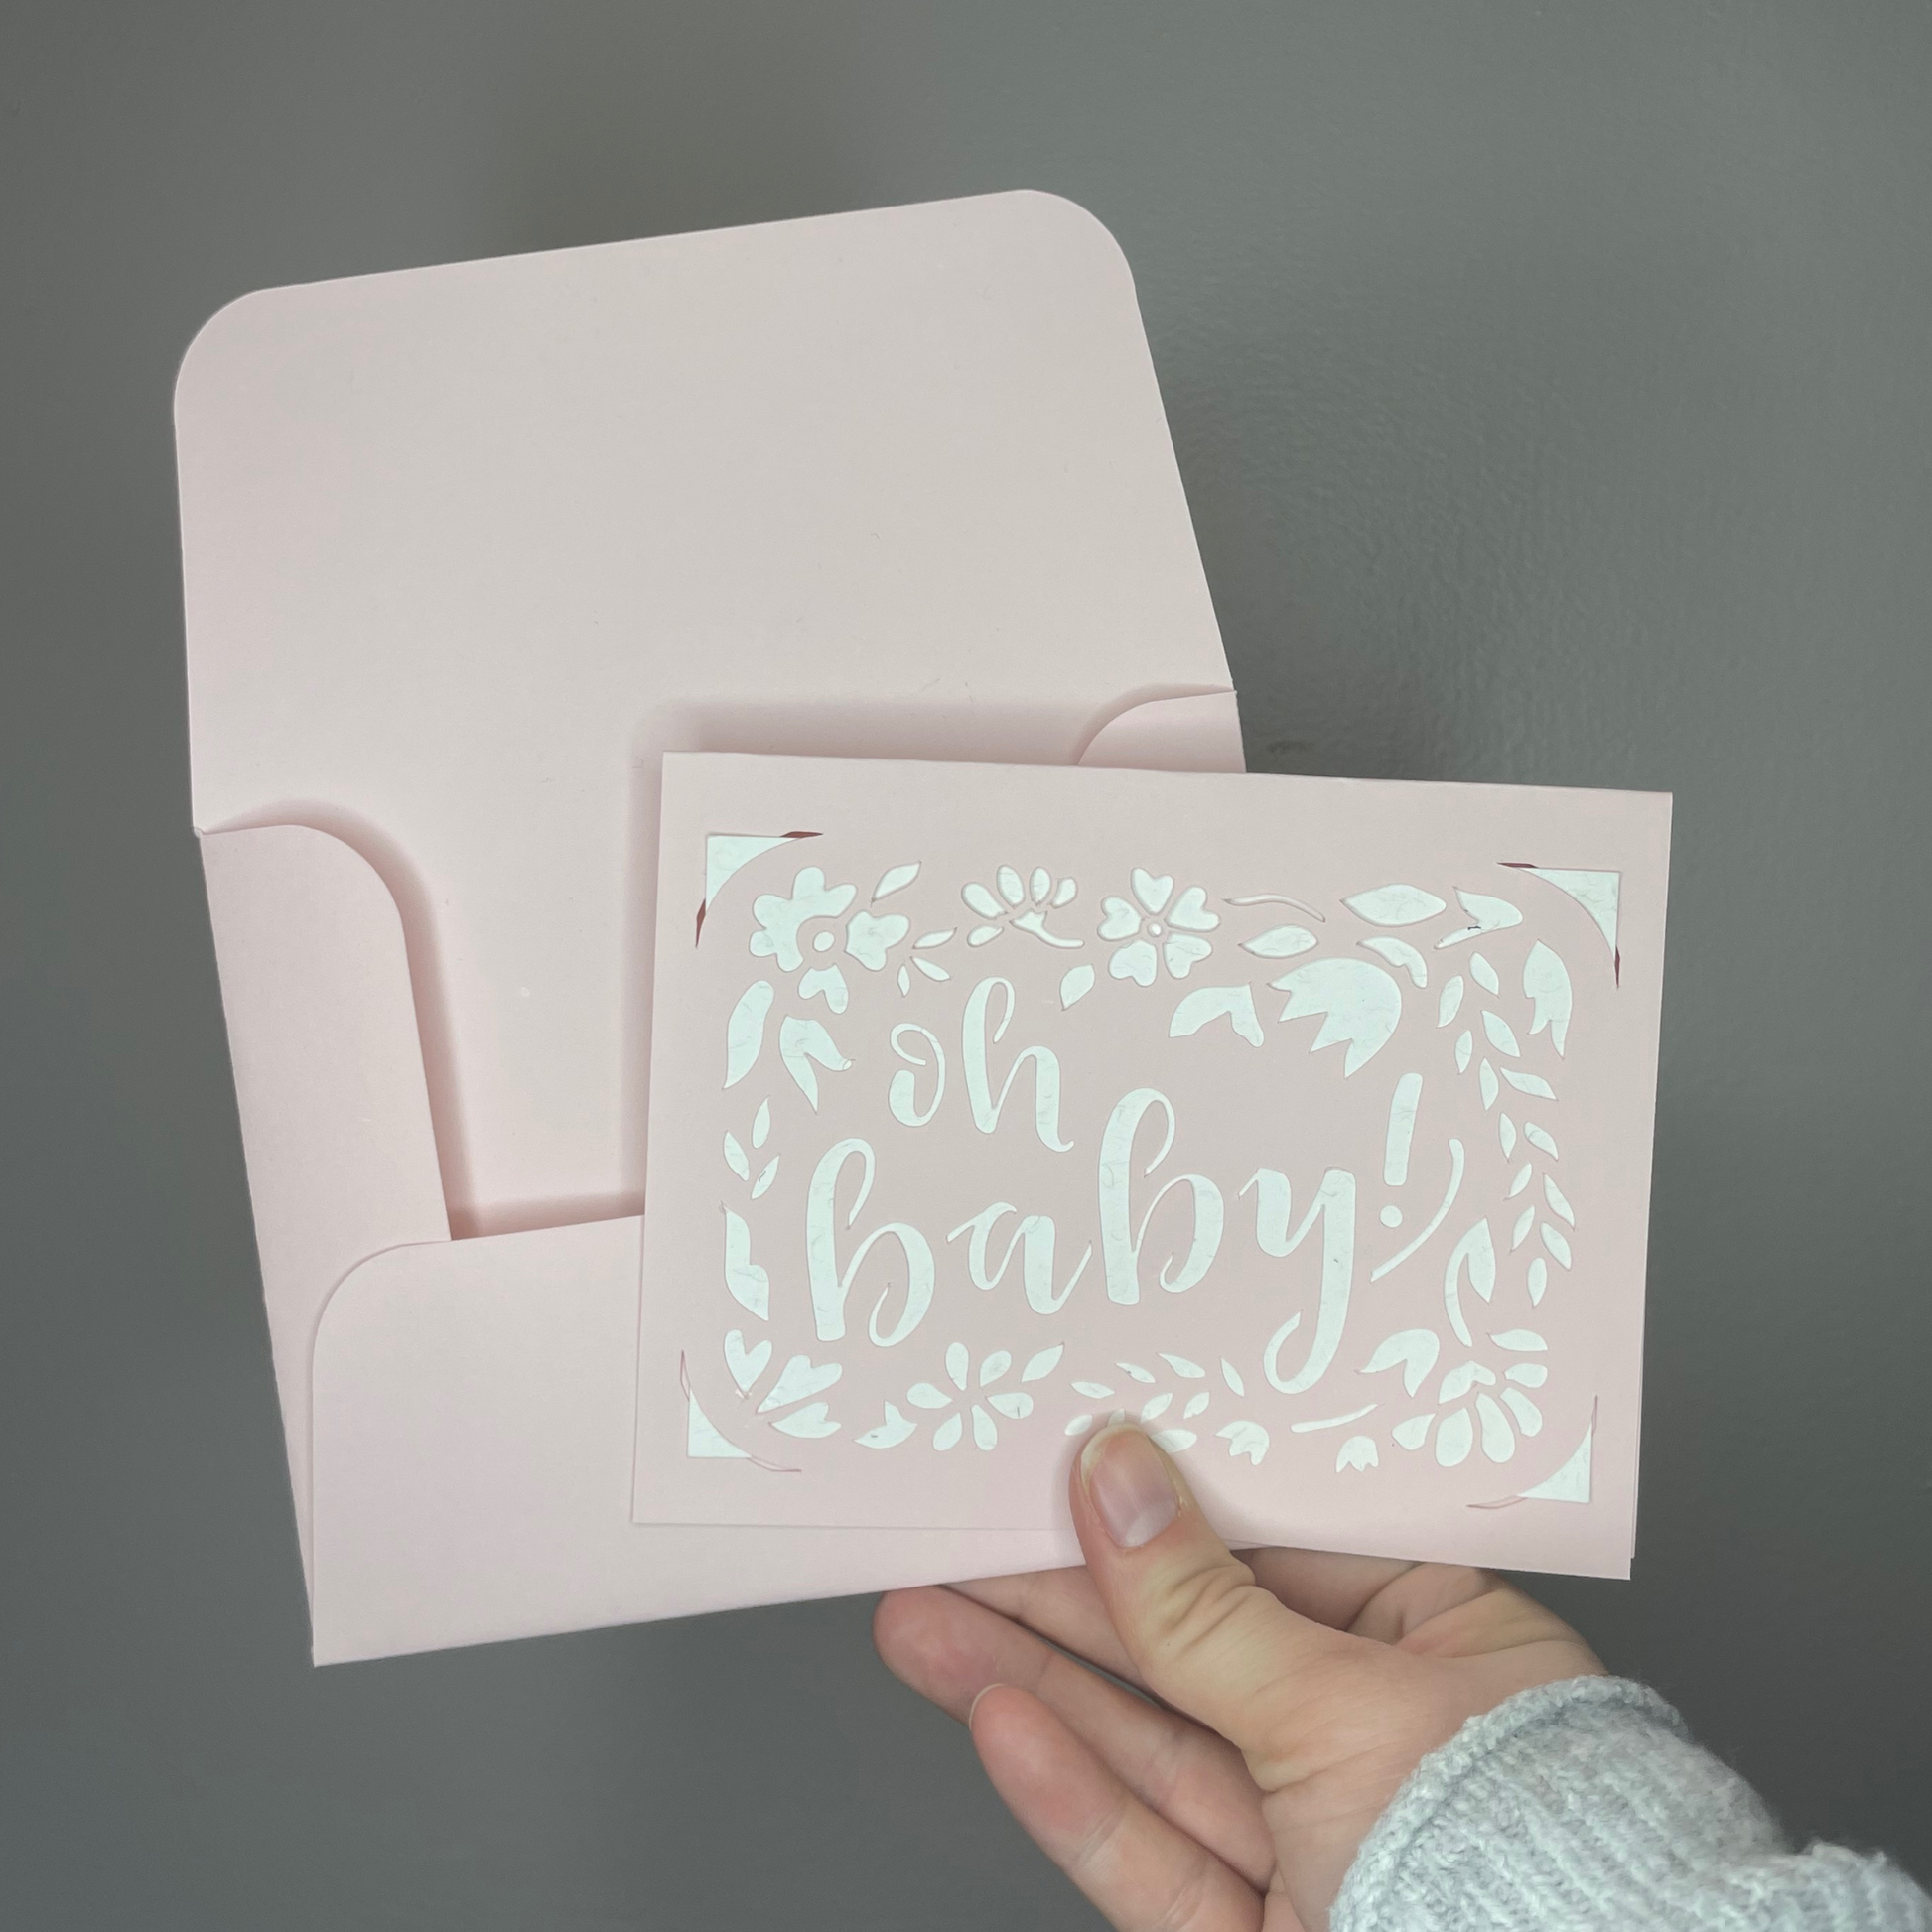 Oh Baby Greeting Card in pink with a white background.